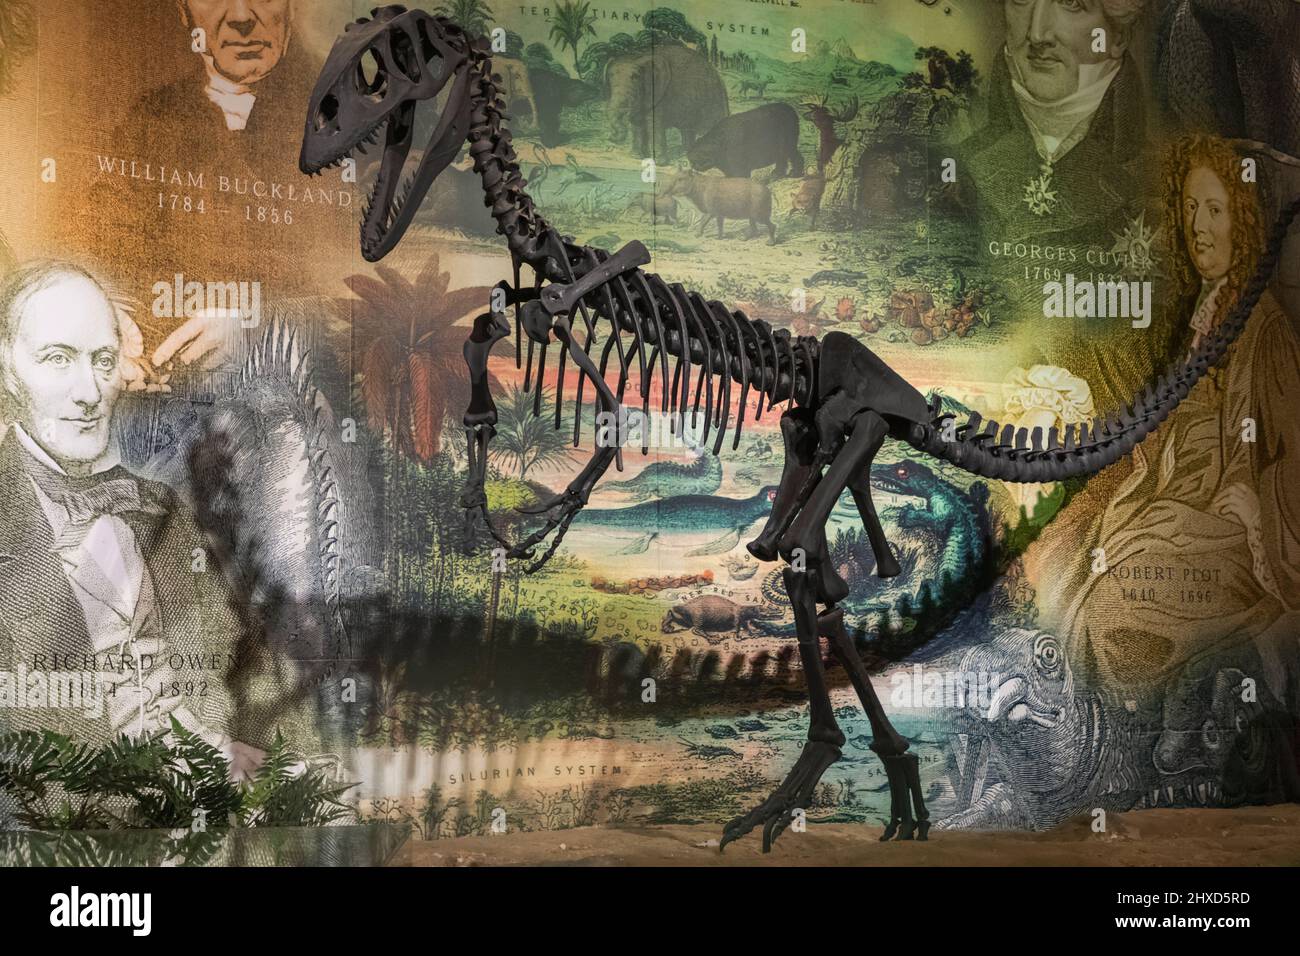 England, Isle of Wight, Sandown, Dinosaur Isle Museum, Display of Dinosaur Skeleton in front of Pictorial Montage of Famous Historical Geologists and Palaeontologists Stock Photo